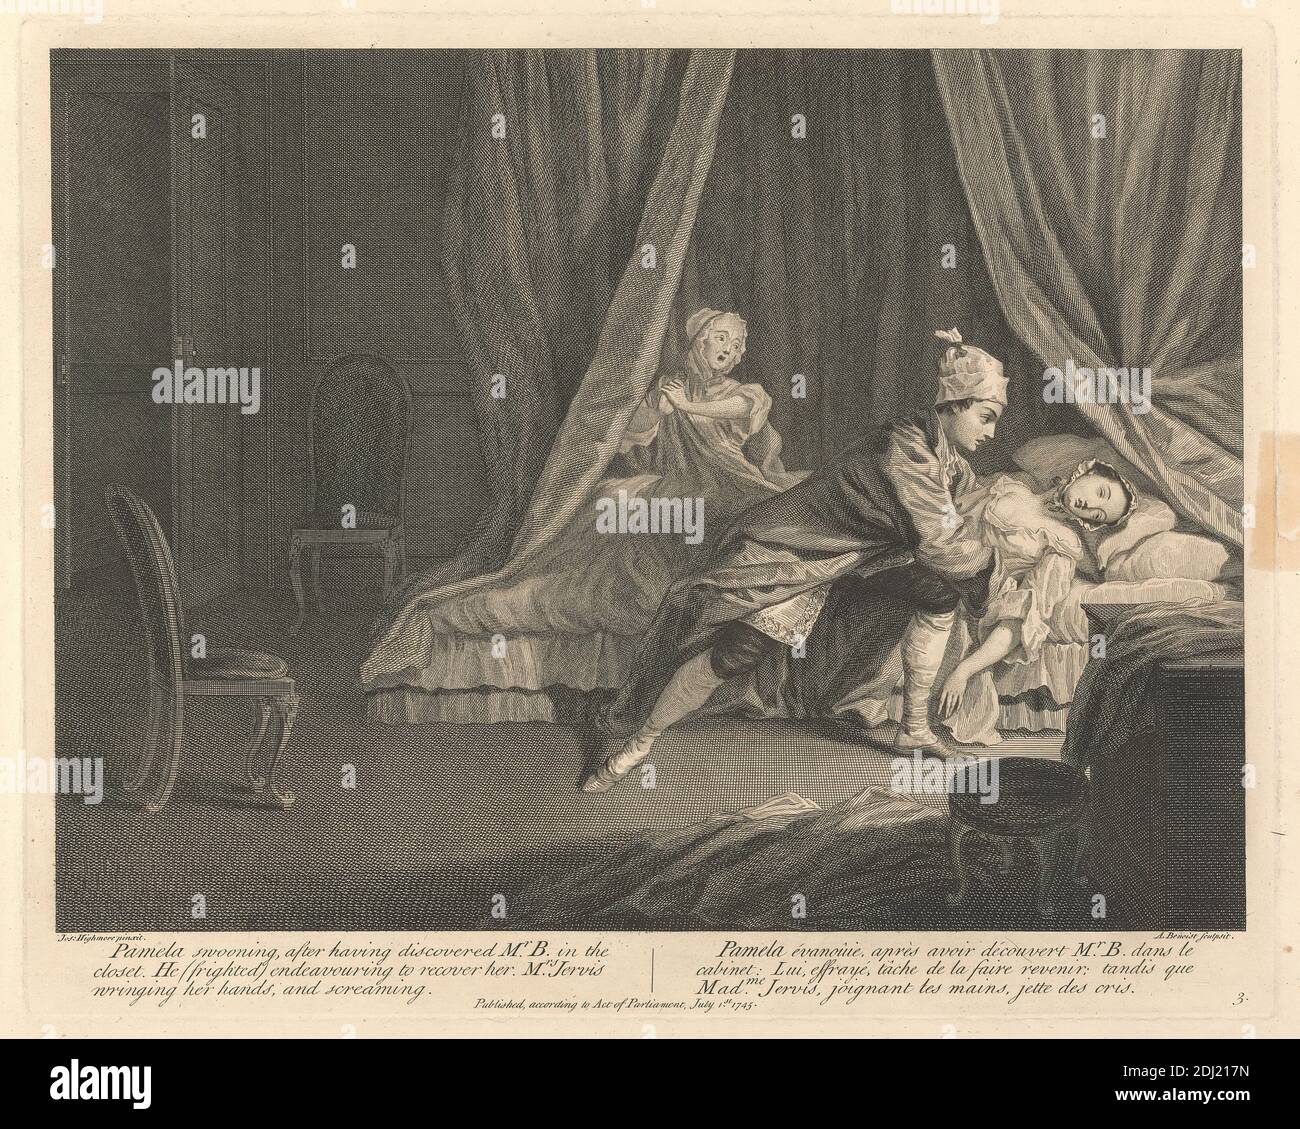 Pamela Swooning, after having discovered Mr. B. in the closet, He (frighted) endeavouring to recover her, Mrs. Jervis wringing her hands, and screaming, Print made by Guillaume Philippe Benoist, 1725–ca. 1770, French, after Joseph Highmore, 1692–1780, British, 1745, Etching with stipple engraving on medium, slightly textured, cream laid paper, Sheet: 15 1/16 x 20 1/16 inches (38.3 x 51 cm), Plate: 11 13/16 x 14 7/8 inches (30 x 37.8 cm), and Image: 10 3/8 x 14 1/8 inches (26.4 x 35.9 cm), bedroom, blankets, cap, chairs, closet, crying, drapery, fainting, fear, kissing, literary theme, man Stock Photo